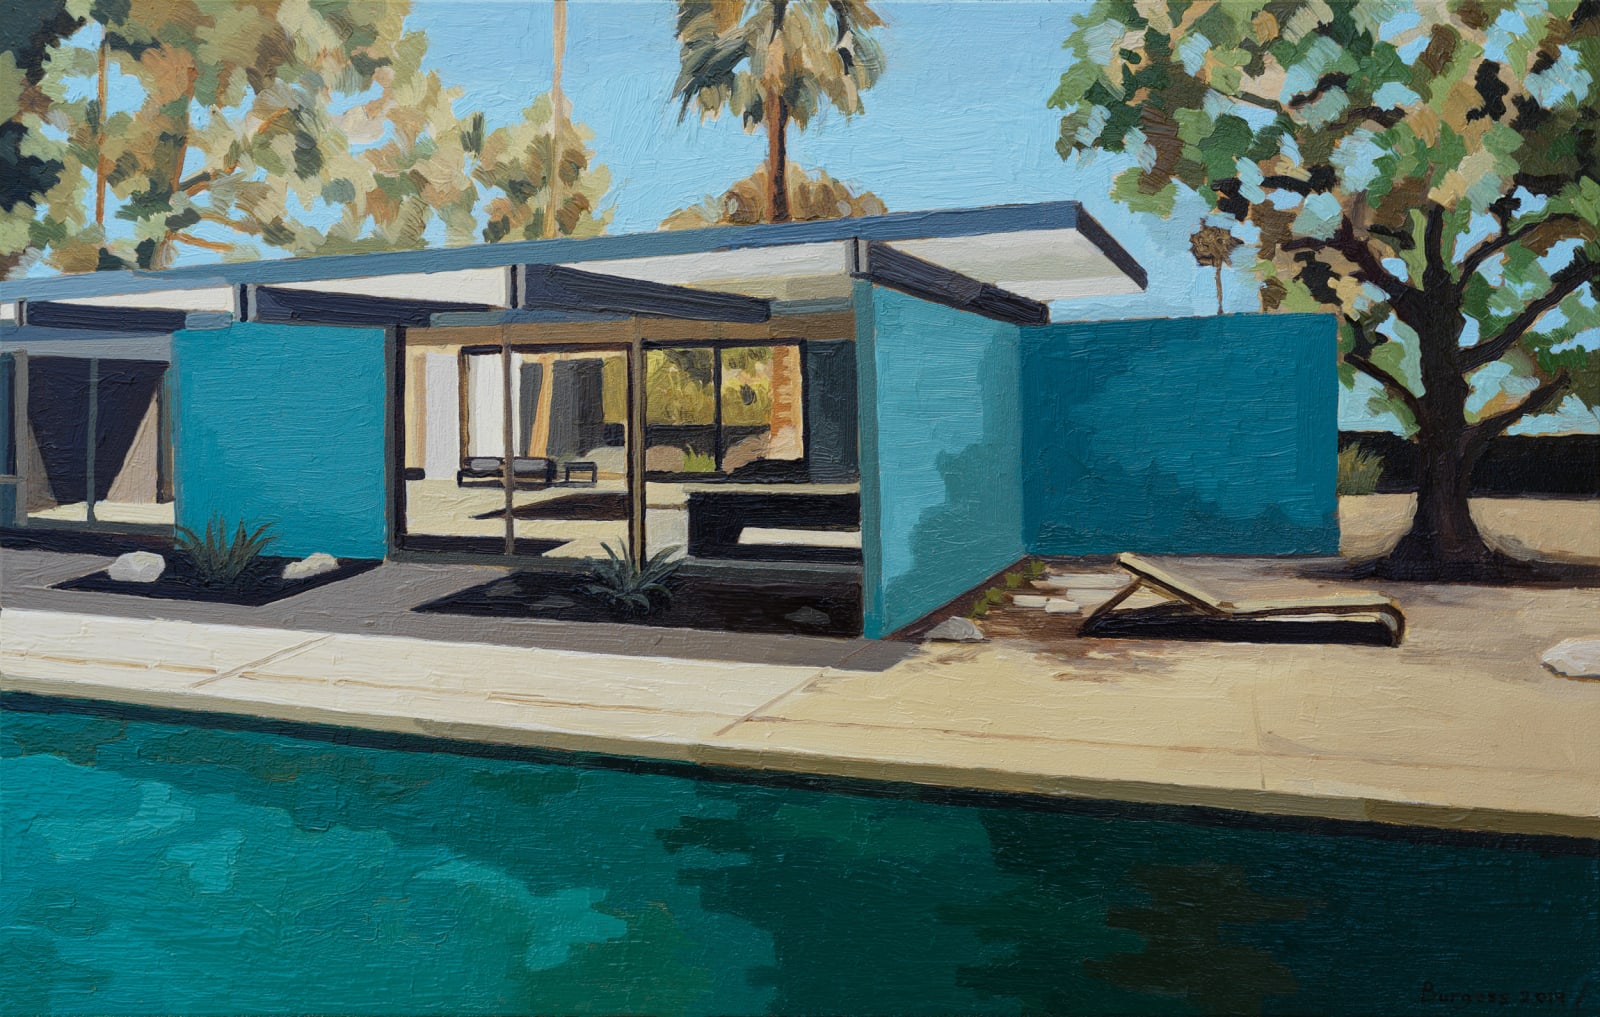 Andy Burgess, Wexler Family Home, Blue Walls, 2019